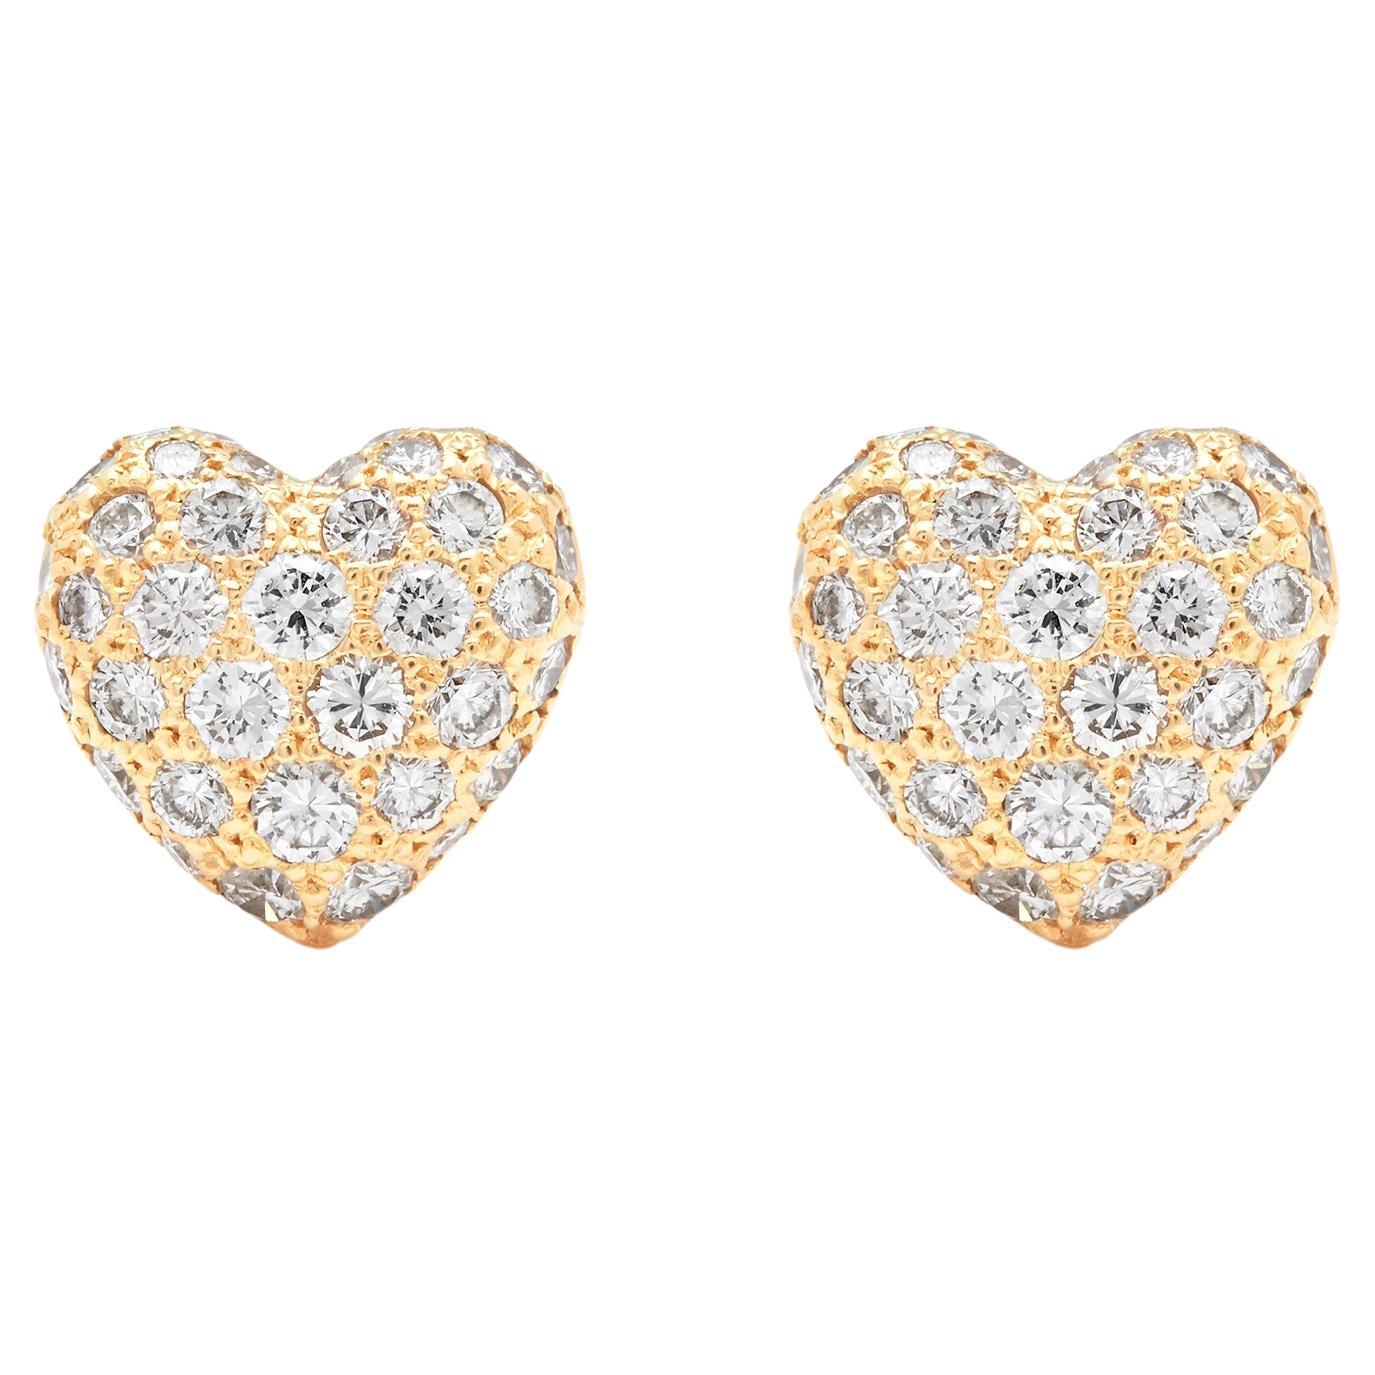 Cartier diamond pave heart stud earrings full set, box and Cartier certificate 